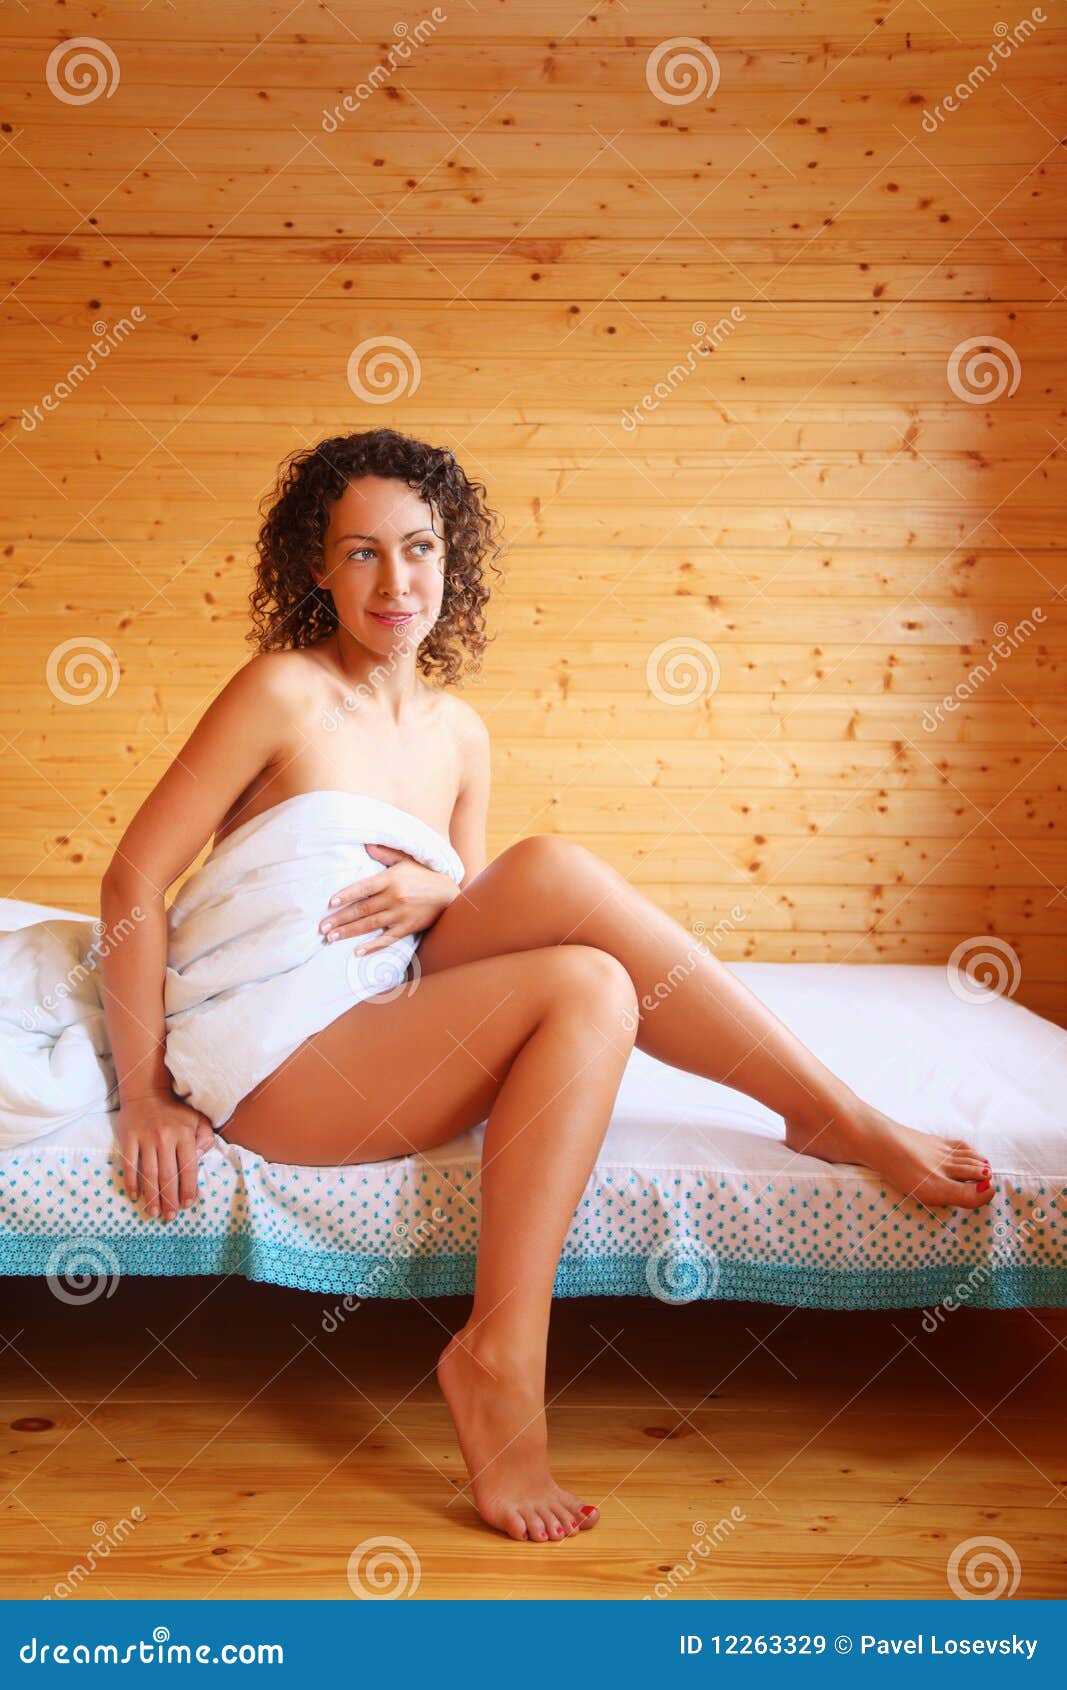 Hot Woman Sitting On Bed In Cosy Room Stock Image - Image 